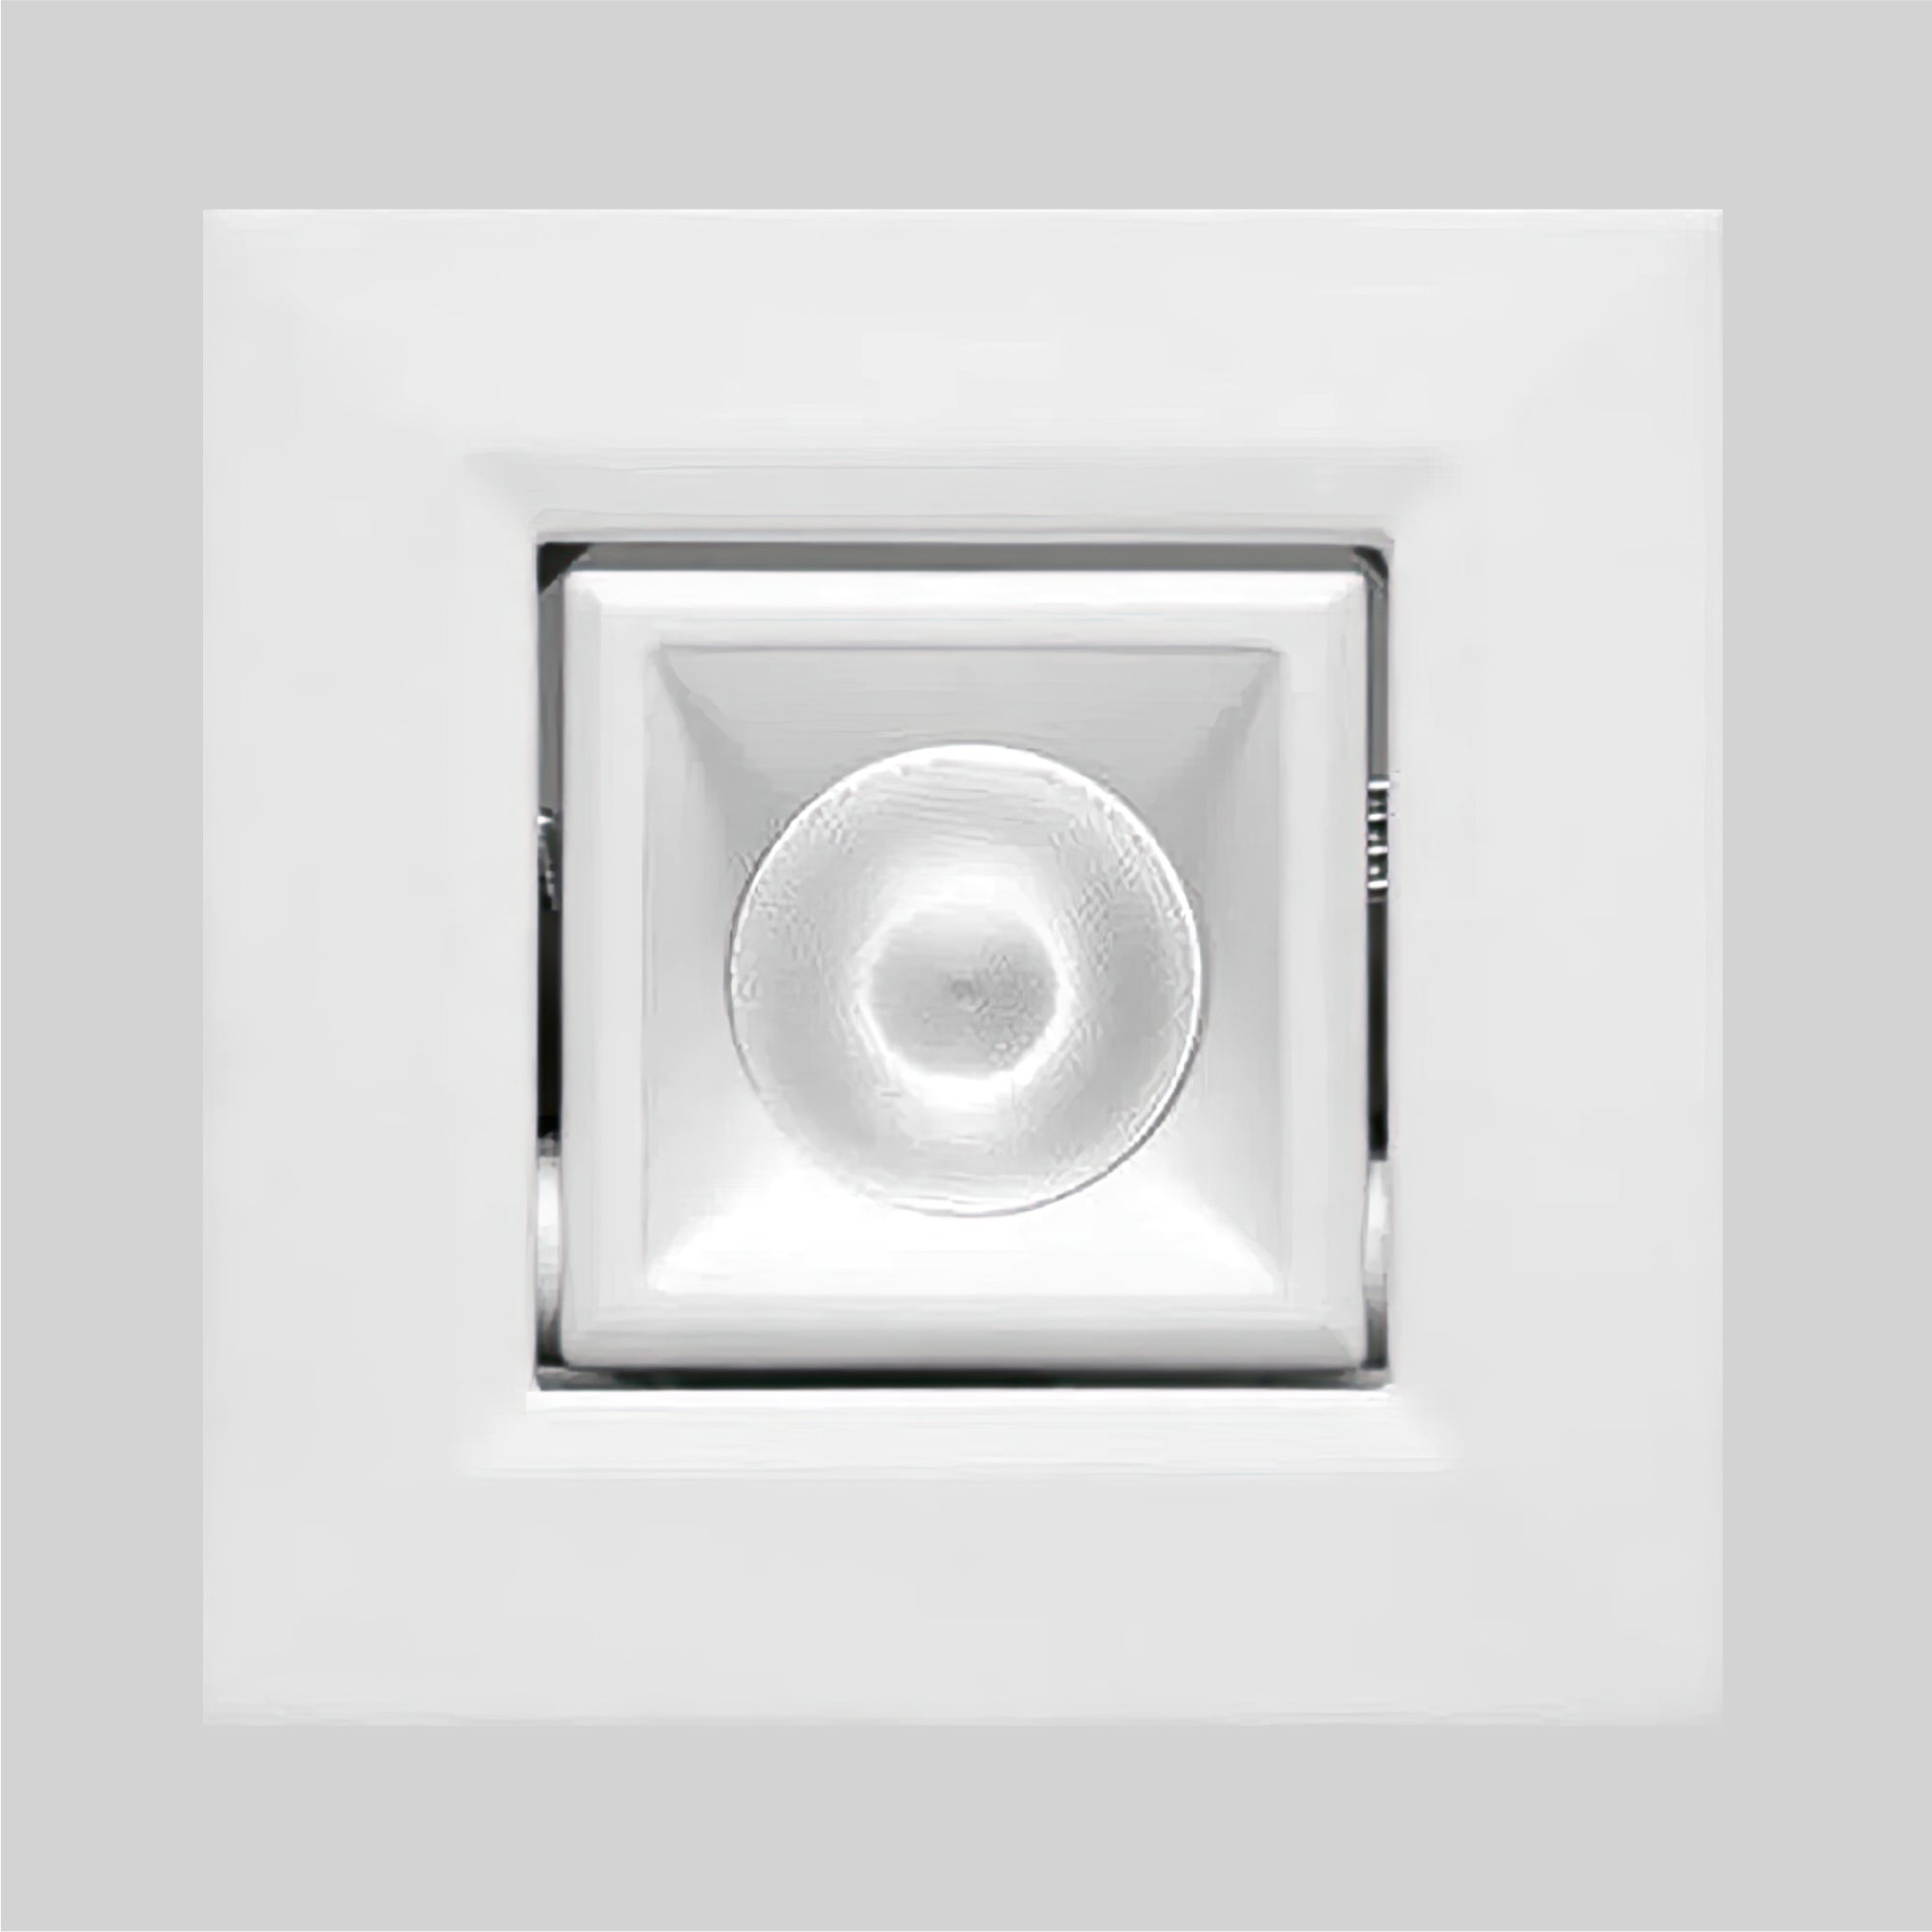 Recessed Multiples 1-Inch Miniature Adjustable LED Fixed Square Outdoor Light